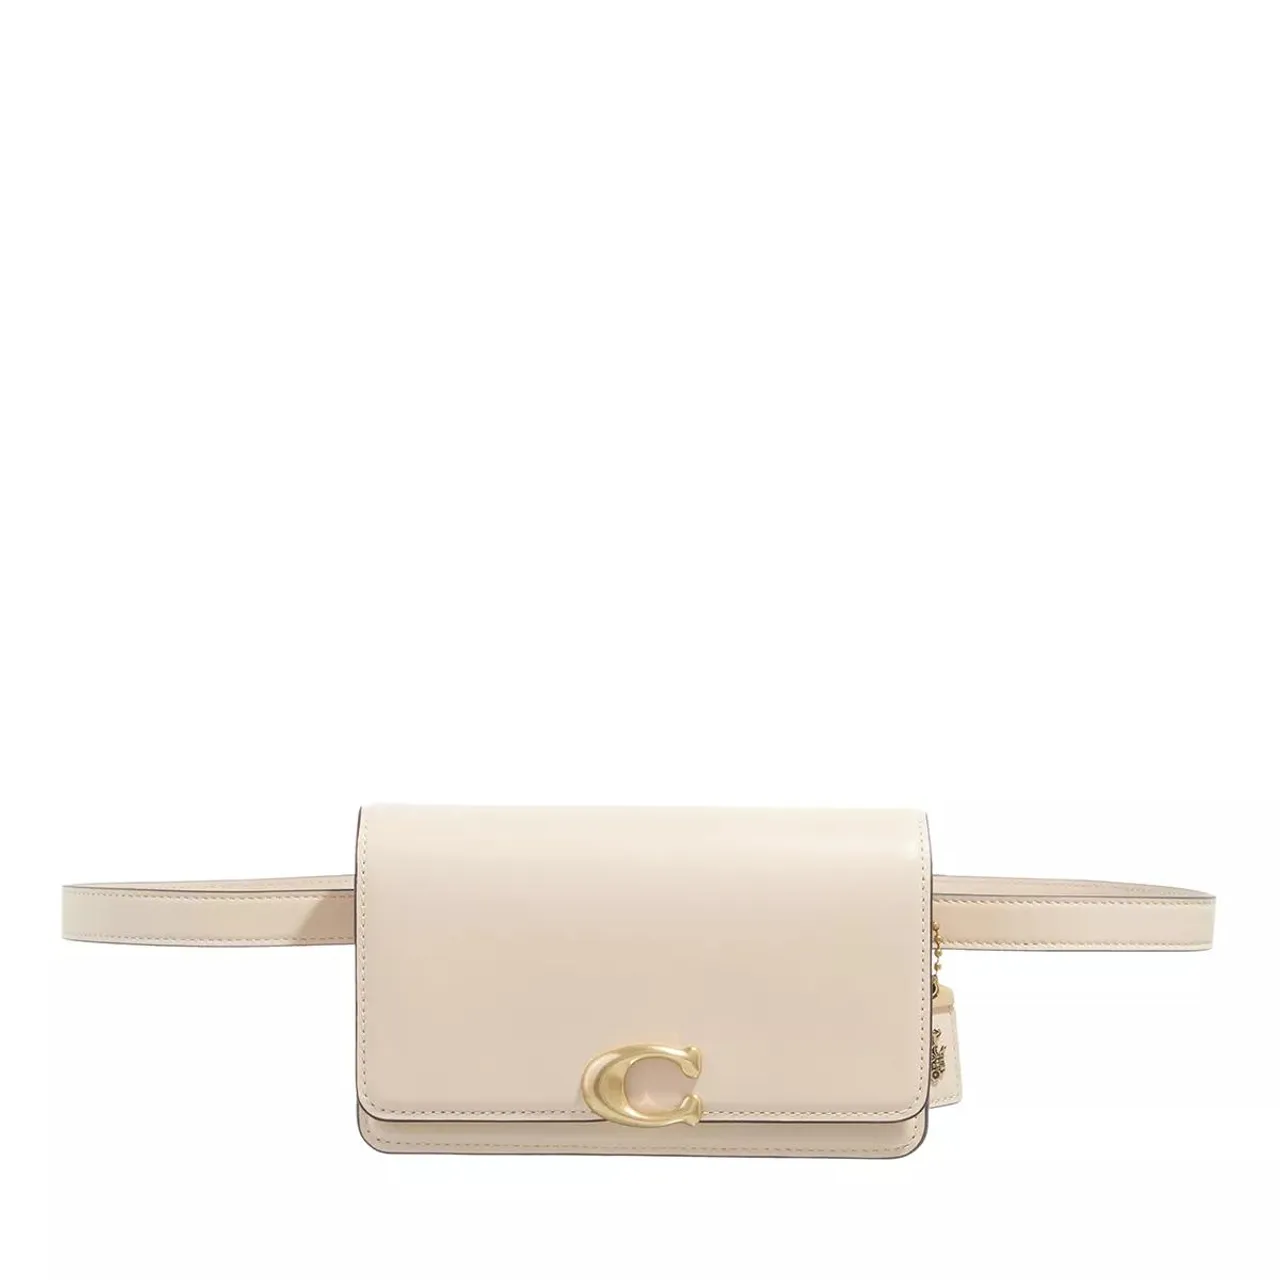 Coach Crossbody Bags - Luxe Refined Calf Leather Bandit Belt Bag - creme - Crossbody Bags for ladies